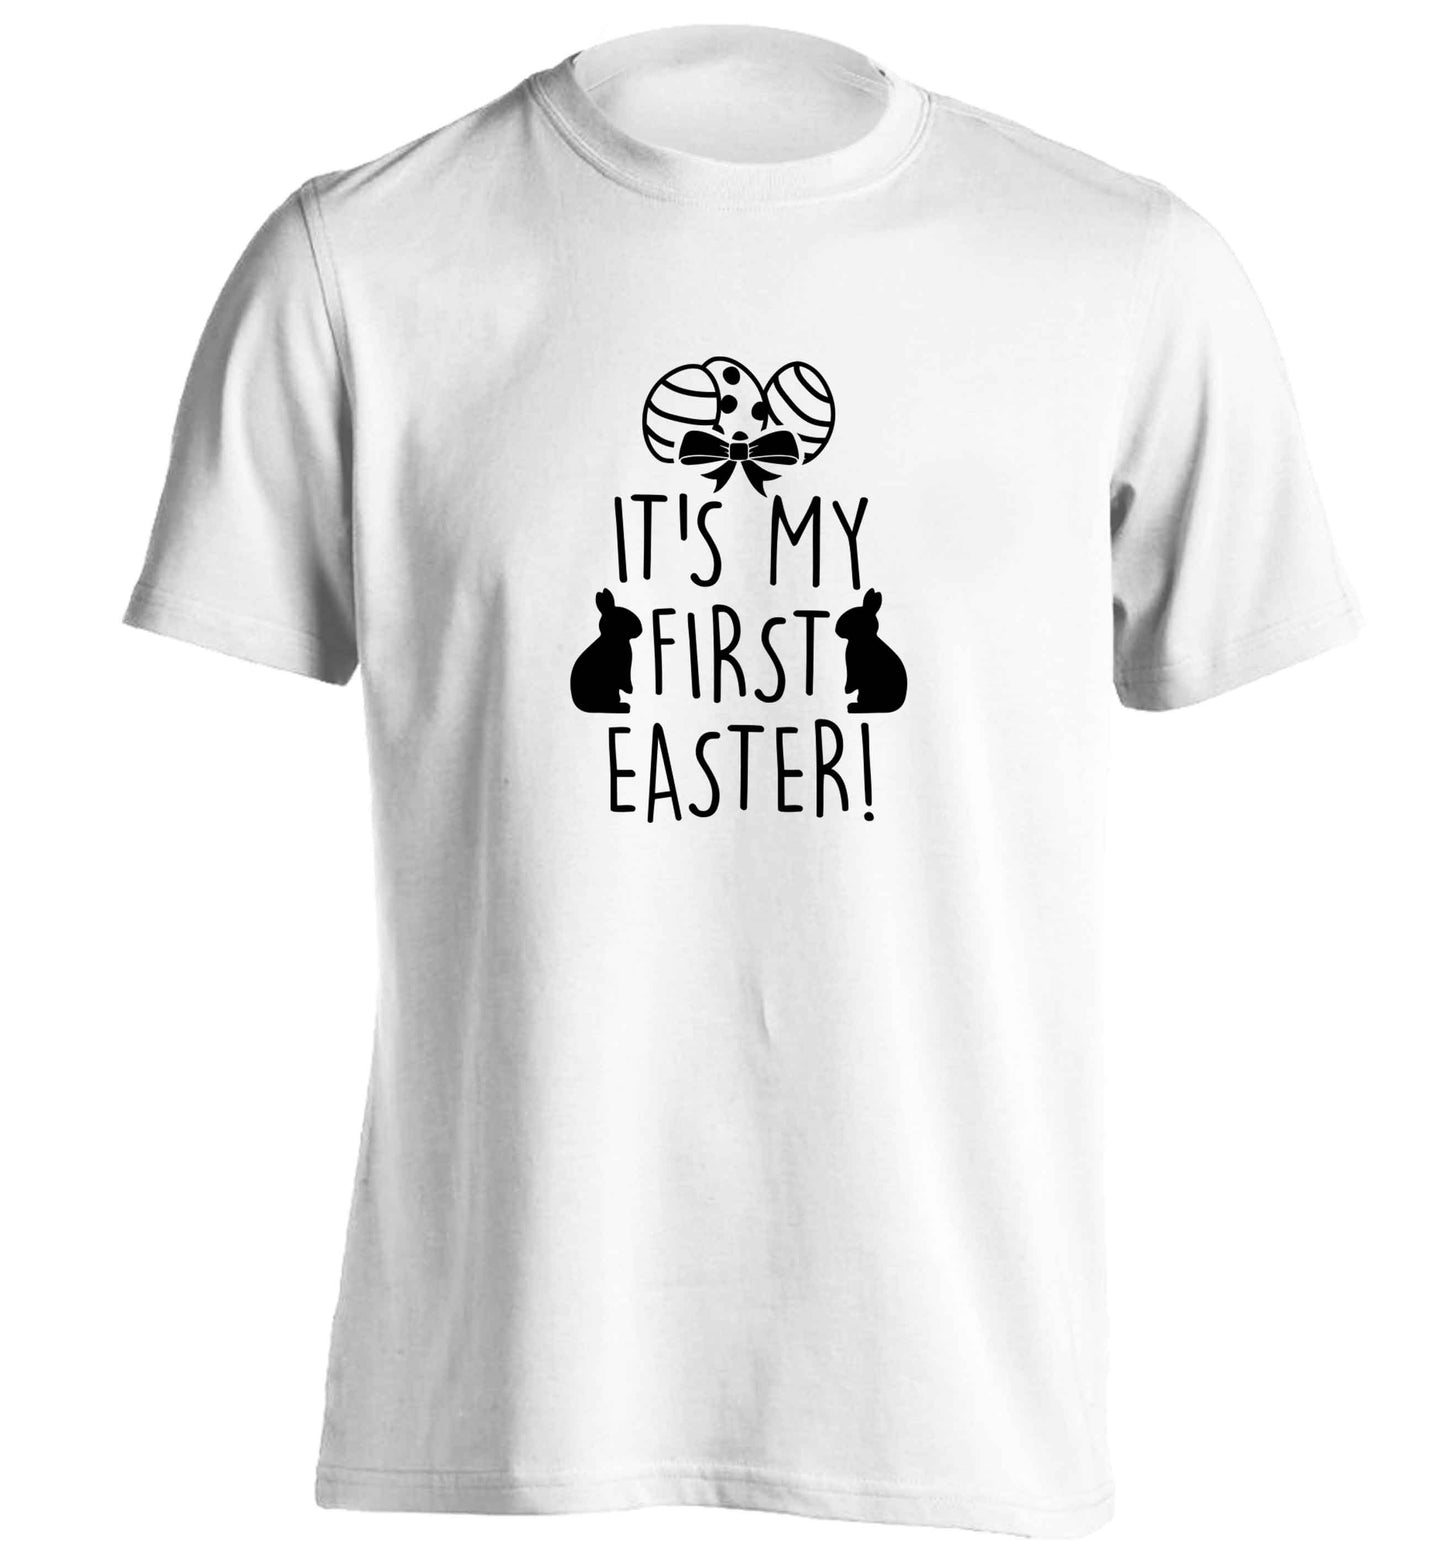 It's my first Easter adults unisex white Tshirt 2XL